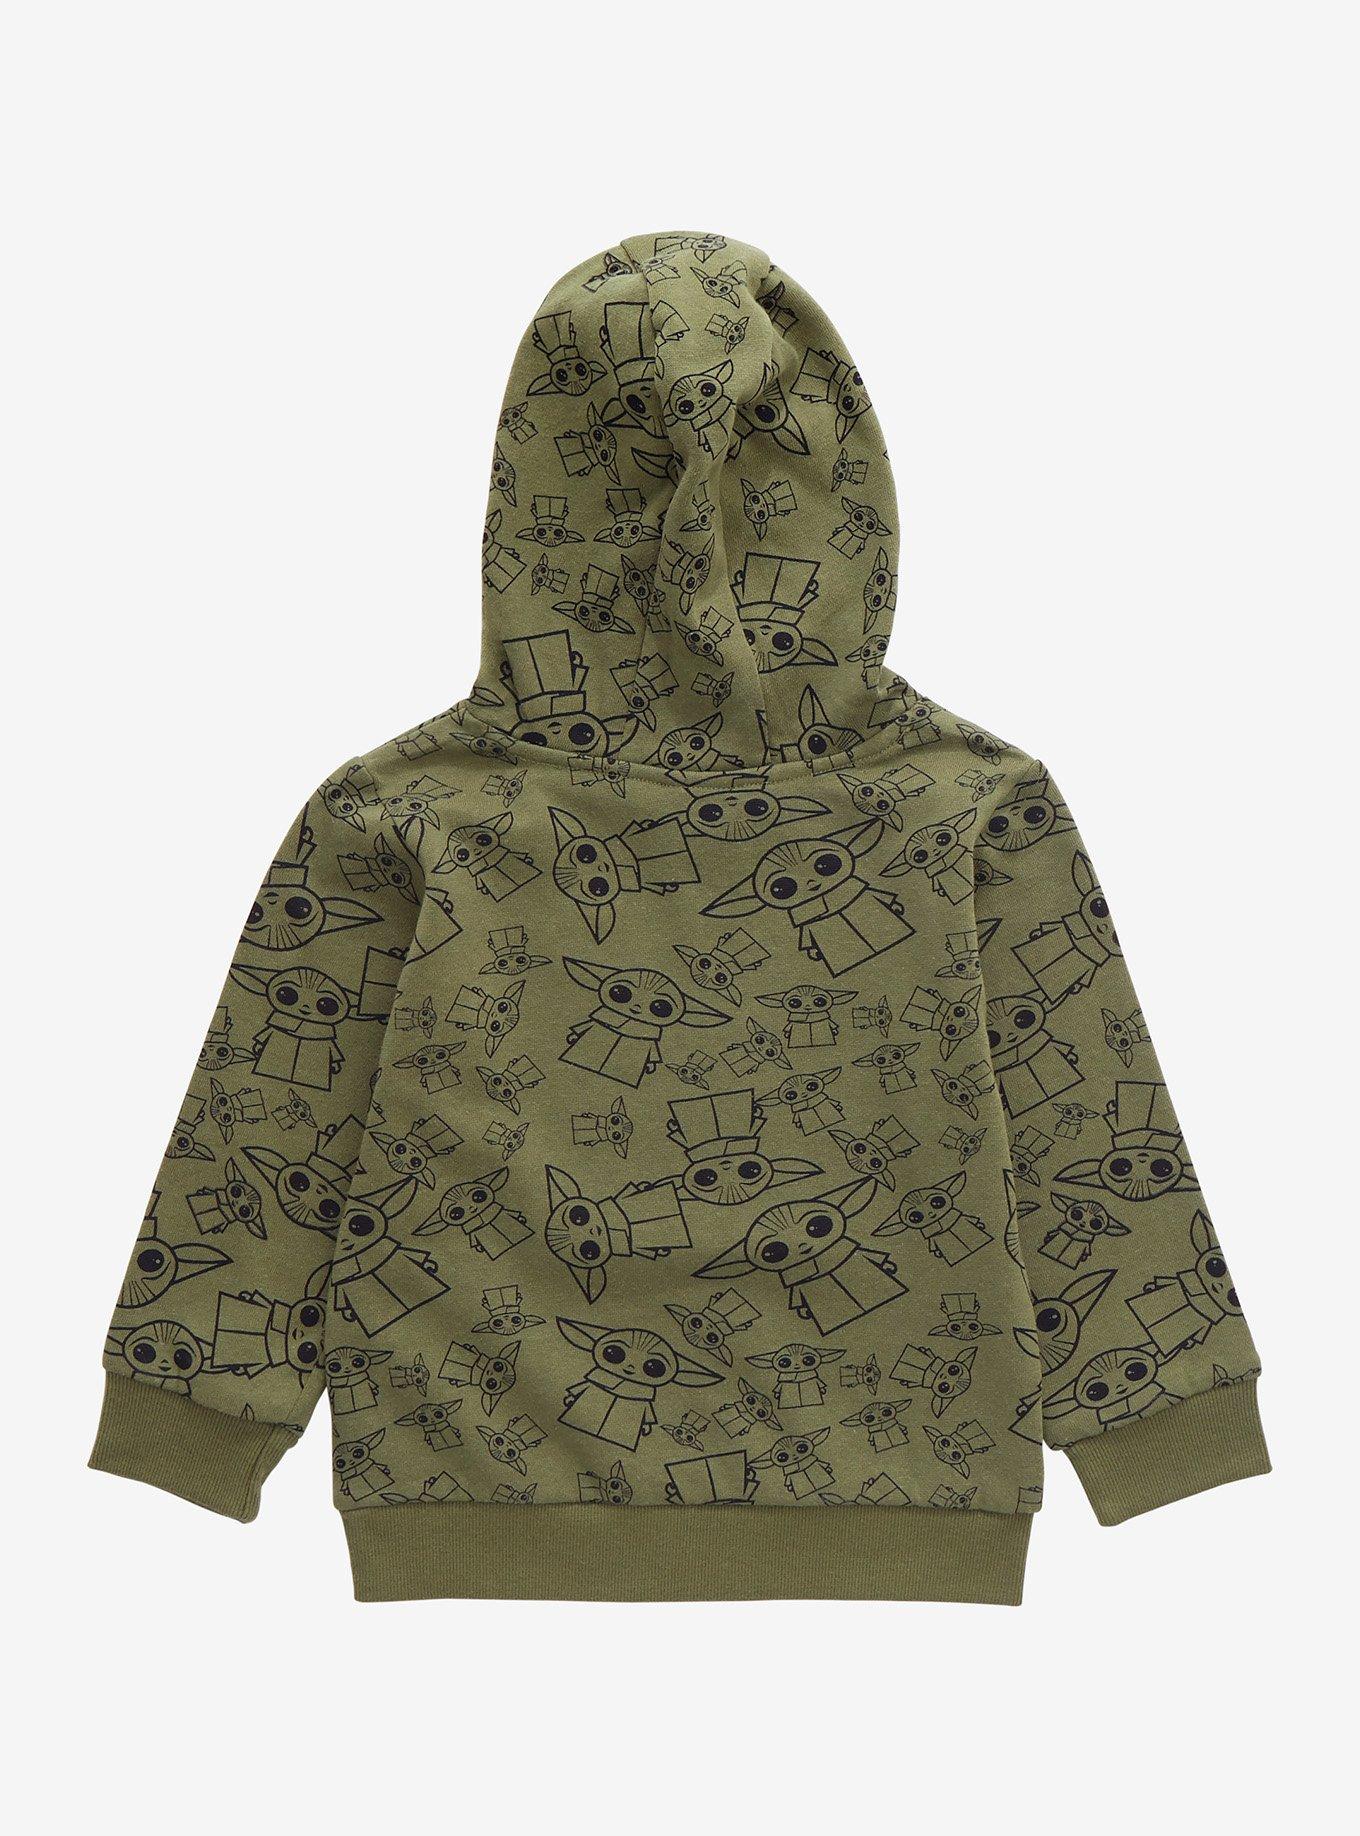 Star Wars The Mandalorian Curious Child Toddler Hoodie - BoxLunch Exclusive, FOREST GREEN, alternate